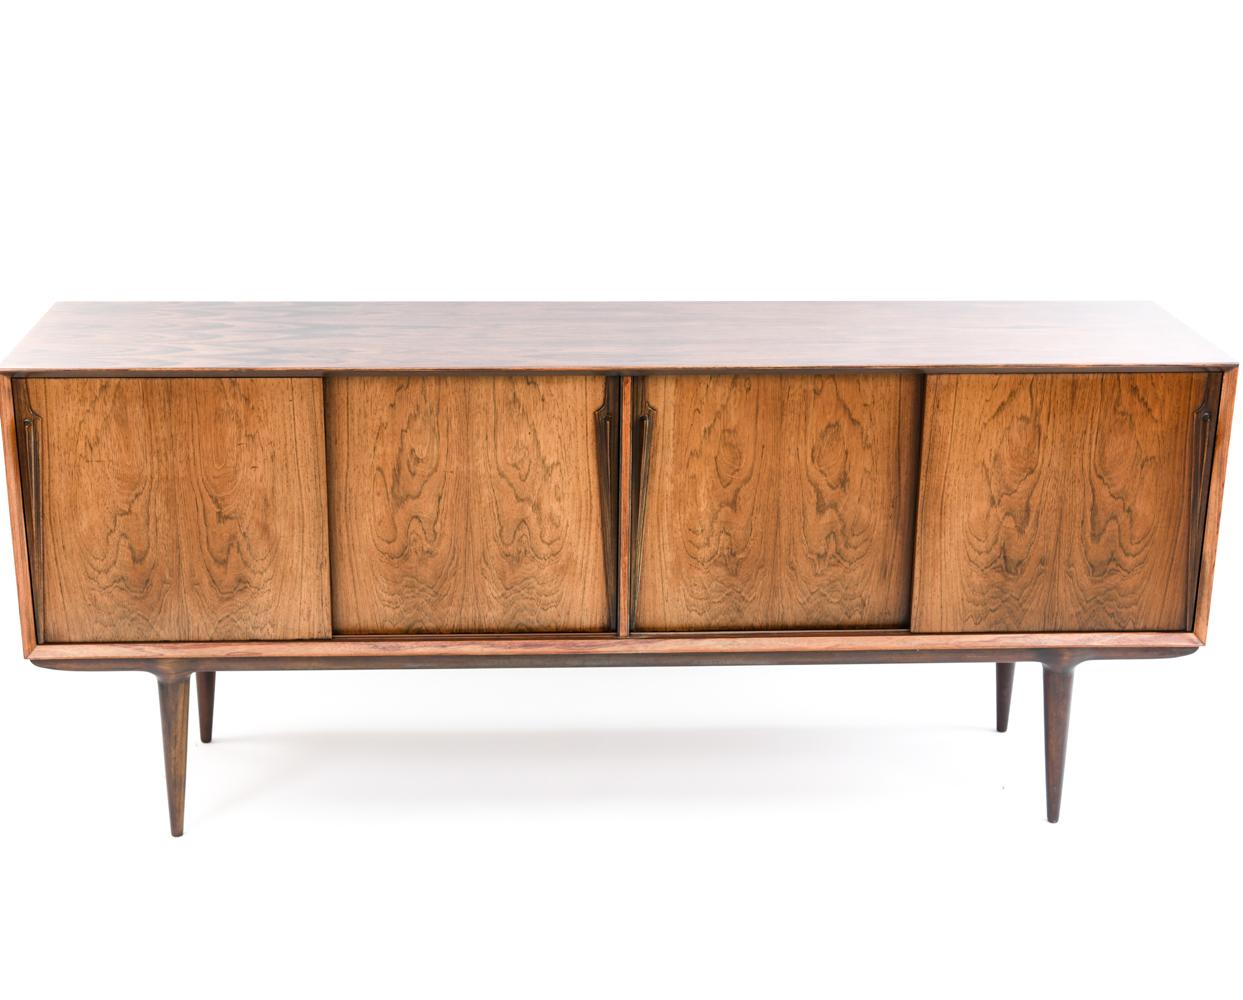 This gorgeous rosewood sideboard was designed by Gunni Omann for Omann Jr. The bevel-edged case sits on tapered legs and features four sliding doors with long organic handles. Inside are two adjustable shelves and, to the left, six felt-lined tray